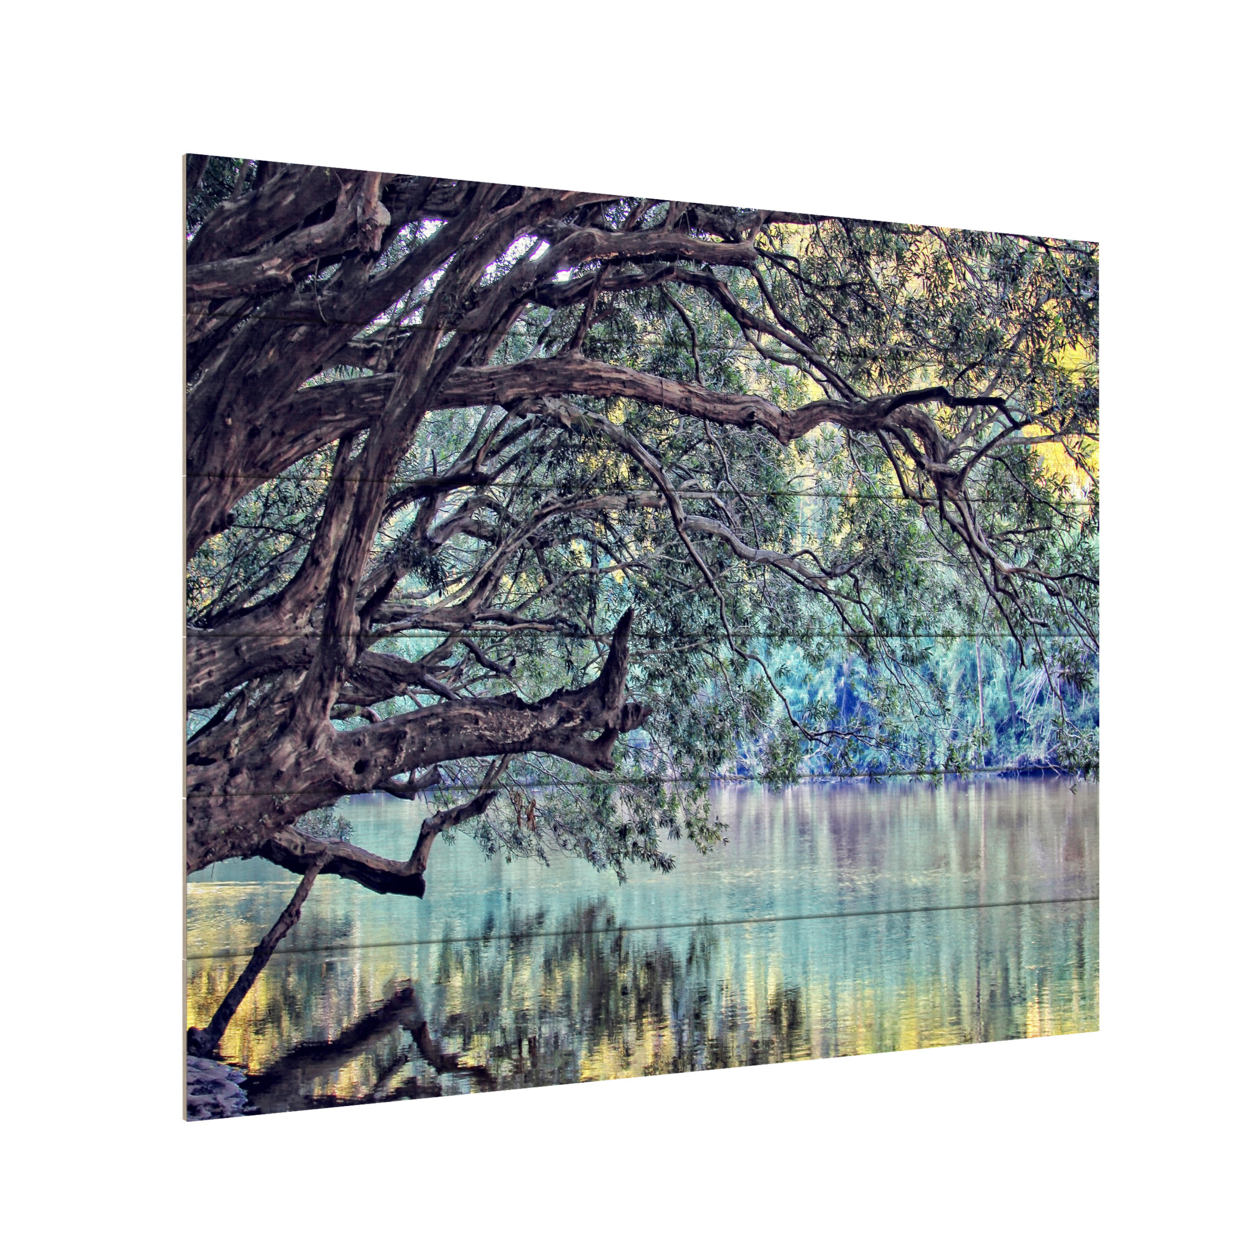 Wooden Slat Art 18 X 22 Inches Titled A Place To Dream Ready To Hang Home Decor Picture